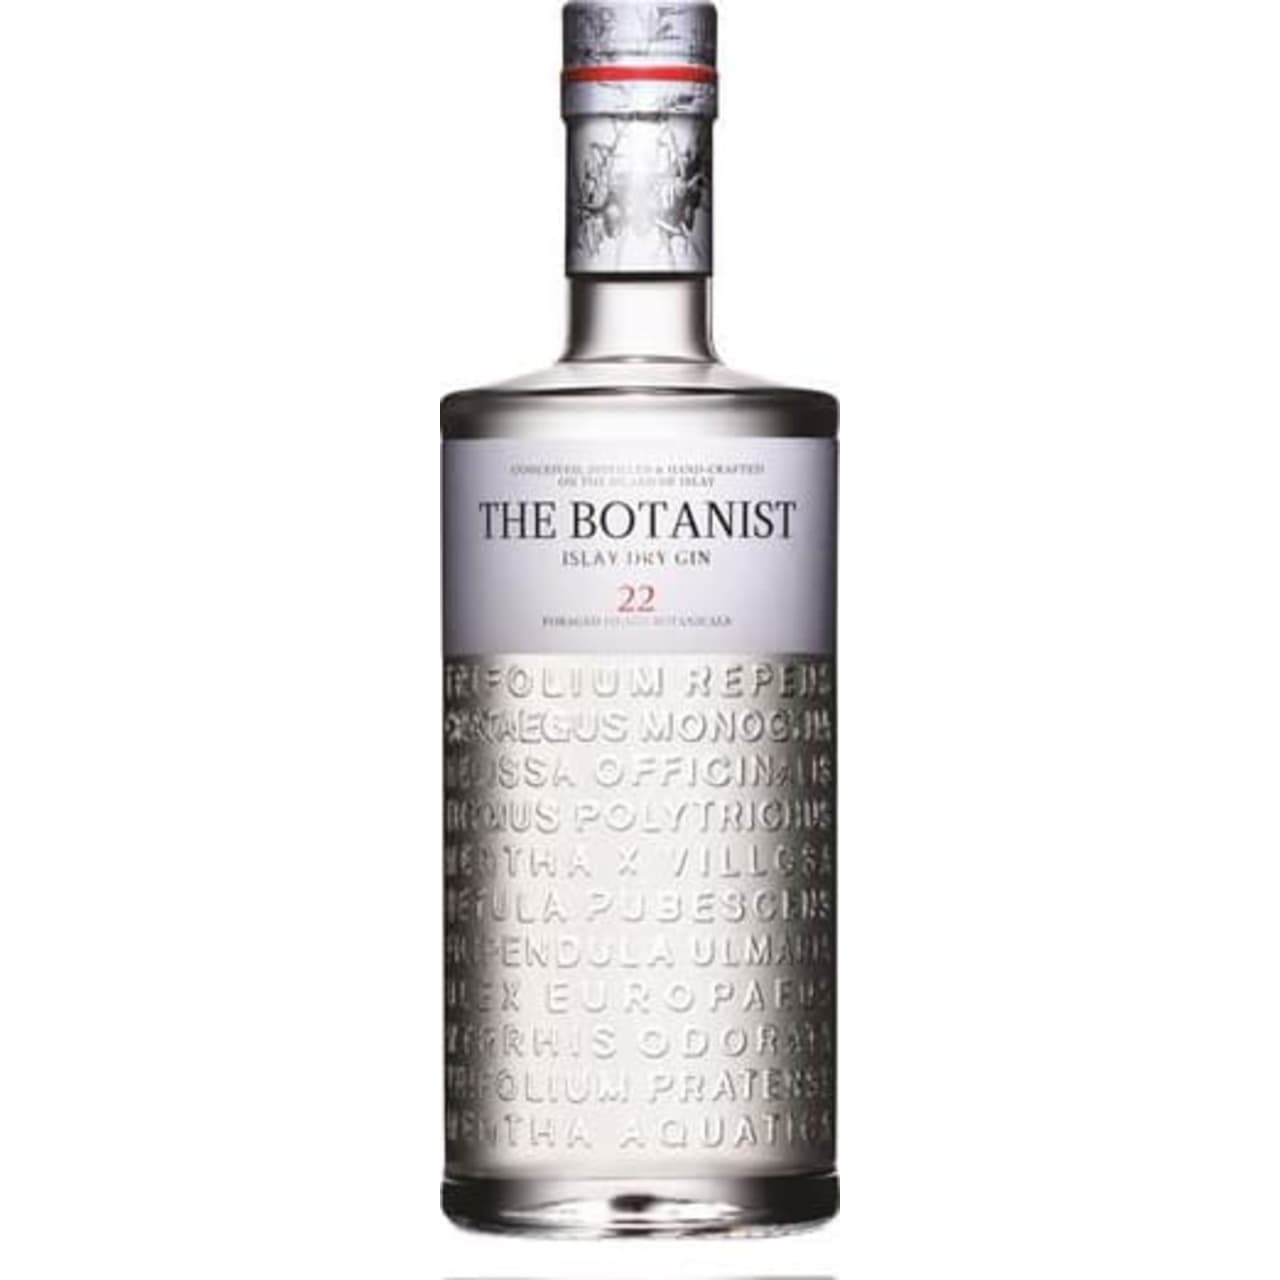 An array of classic Gin flavours all augmented together for a truly exceptional Gin. Predominately clean fresh citrus notes with a burst of flowery finesse. The mouth feel and finish to this Gin is exceedingly clean.